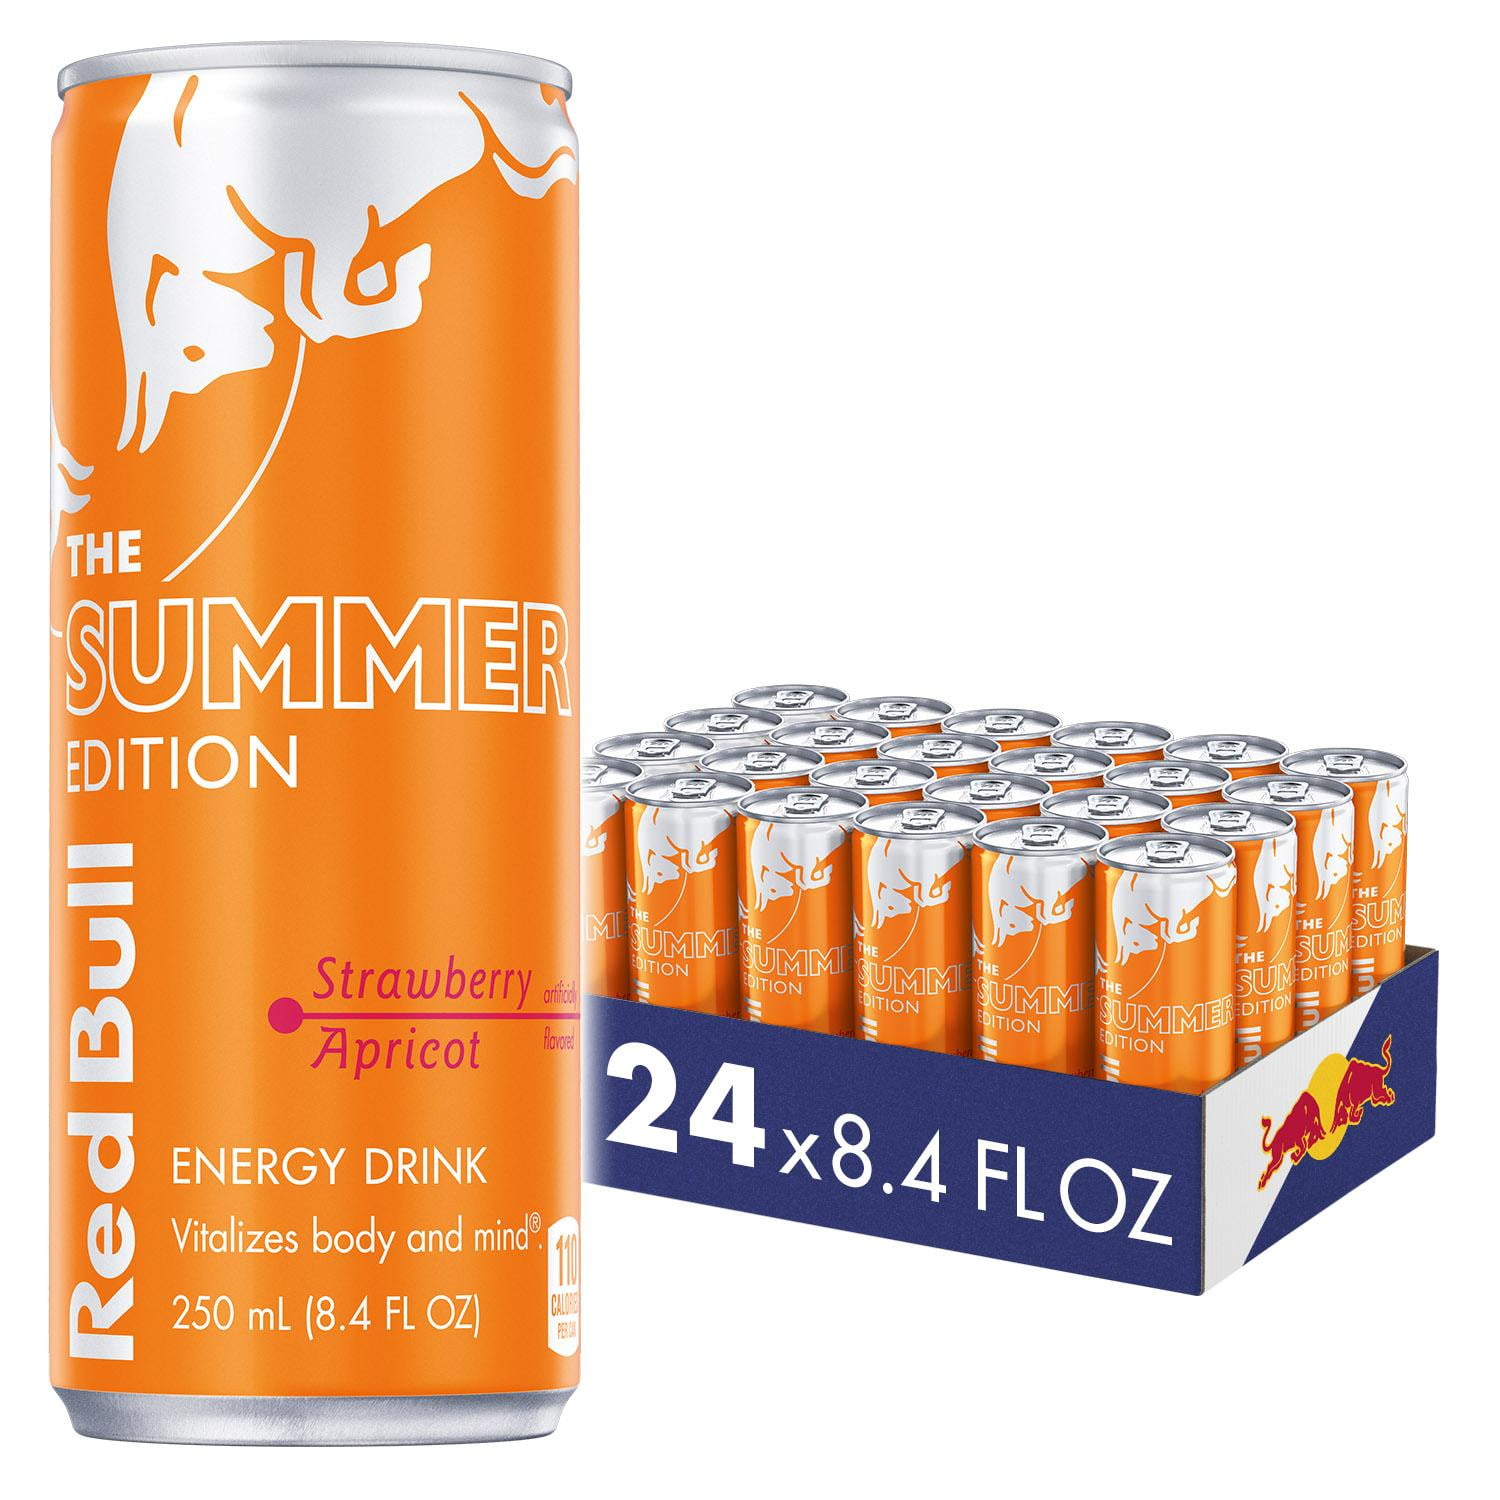 RED BULL SUMMER EDITION STRAWBERRY APRICOT 8.4OZ, 24 pack - Walmart.com